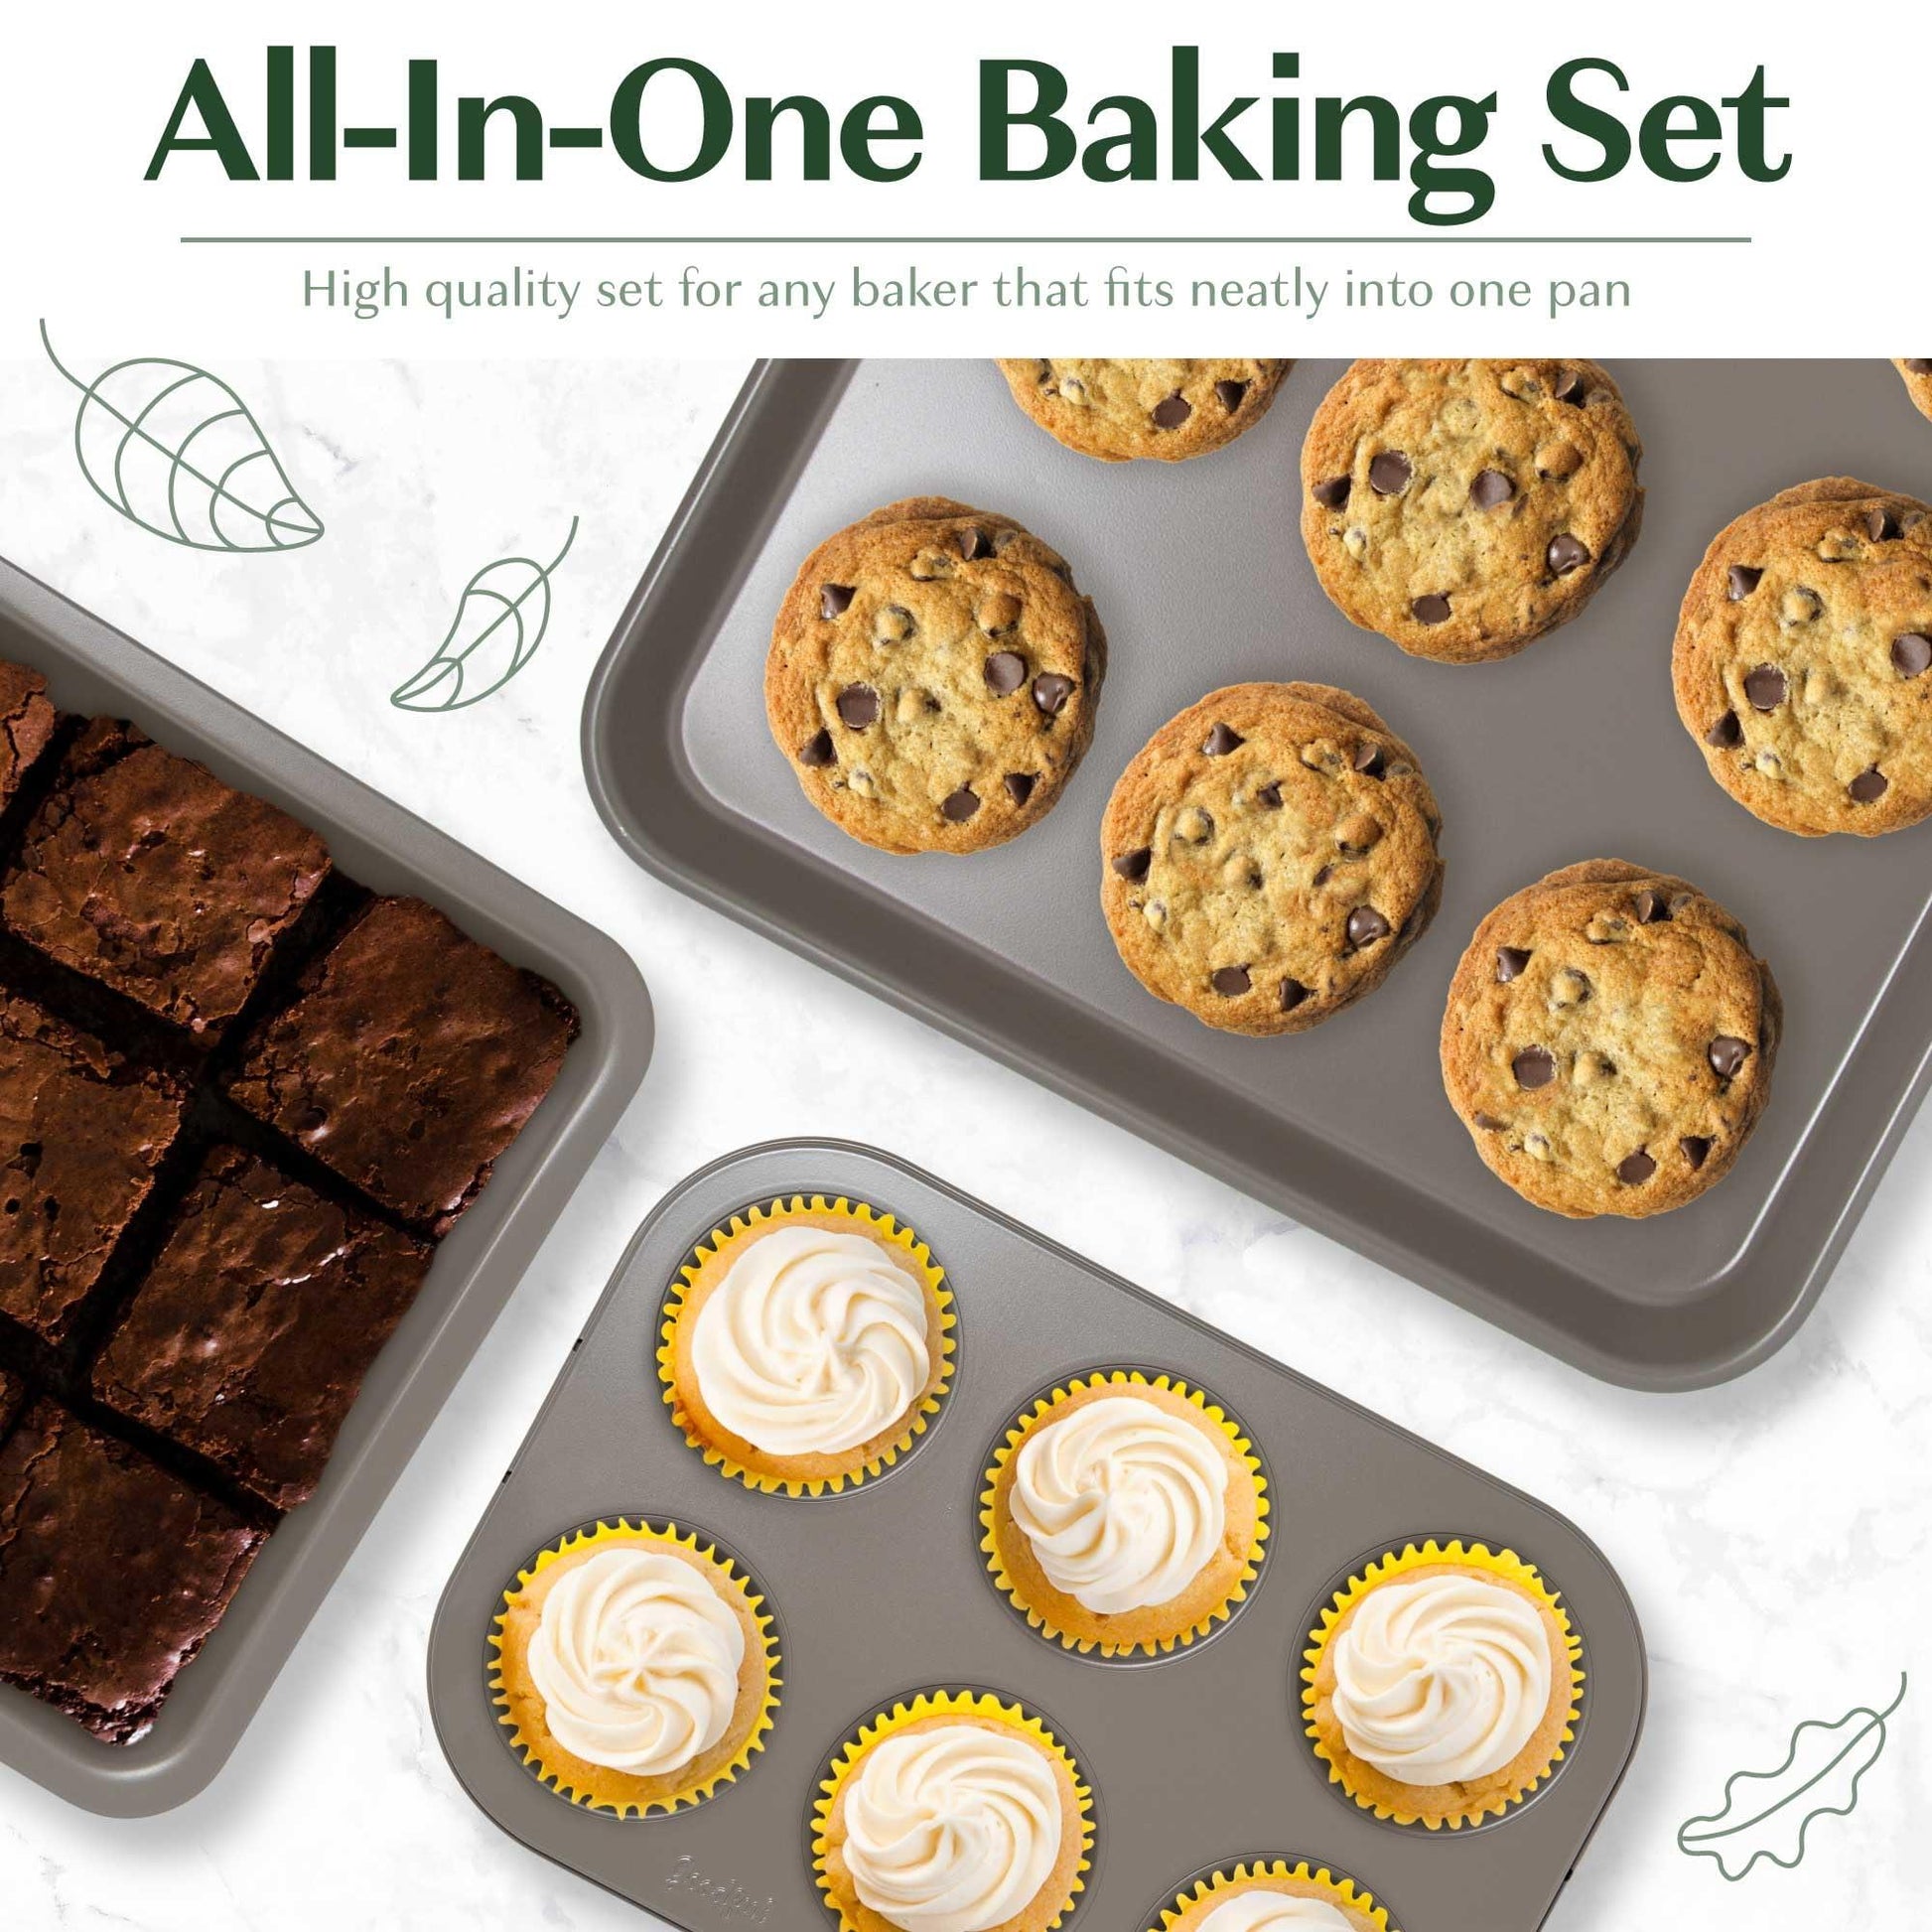 Goodful All-In-One Nonstick Bakeware Set, Stackable and Space Saving Design includes Round and Square Pans, Muffin Pans, Cookie Sheet and Roaster, Dishwasher Safe, 8-Piece, Graphite - CookCave